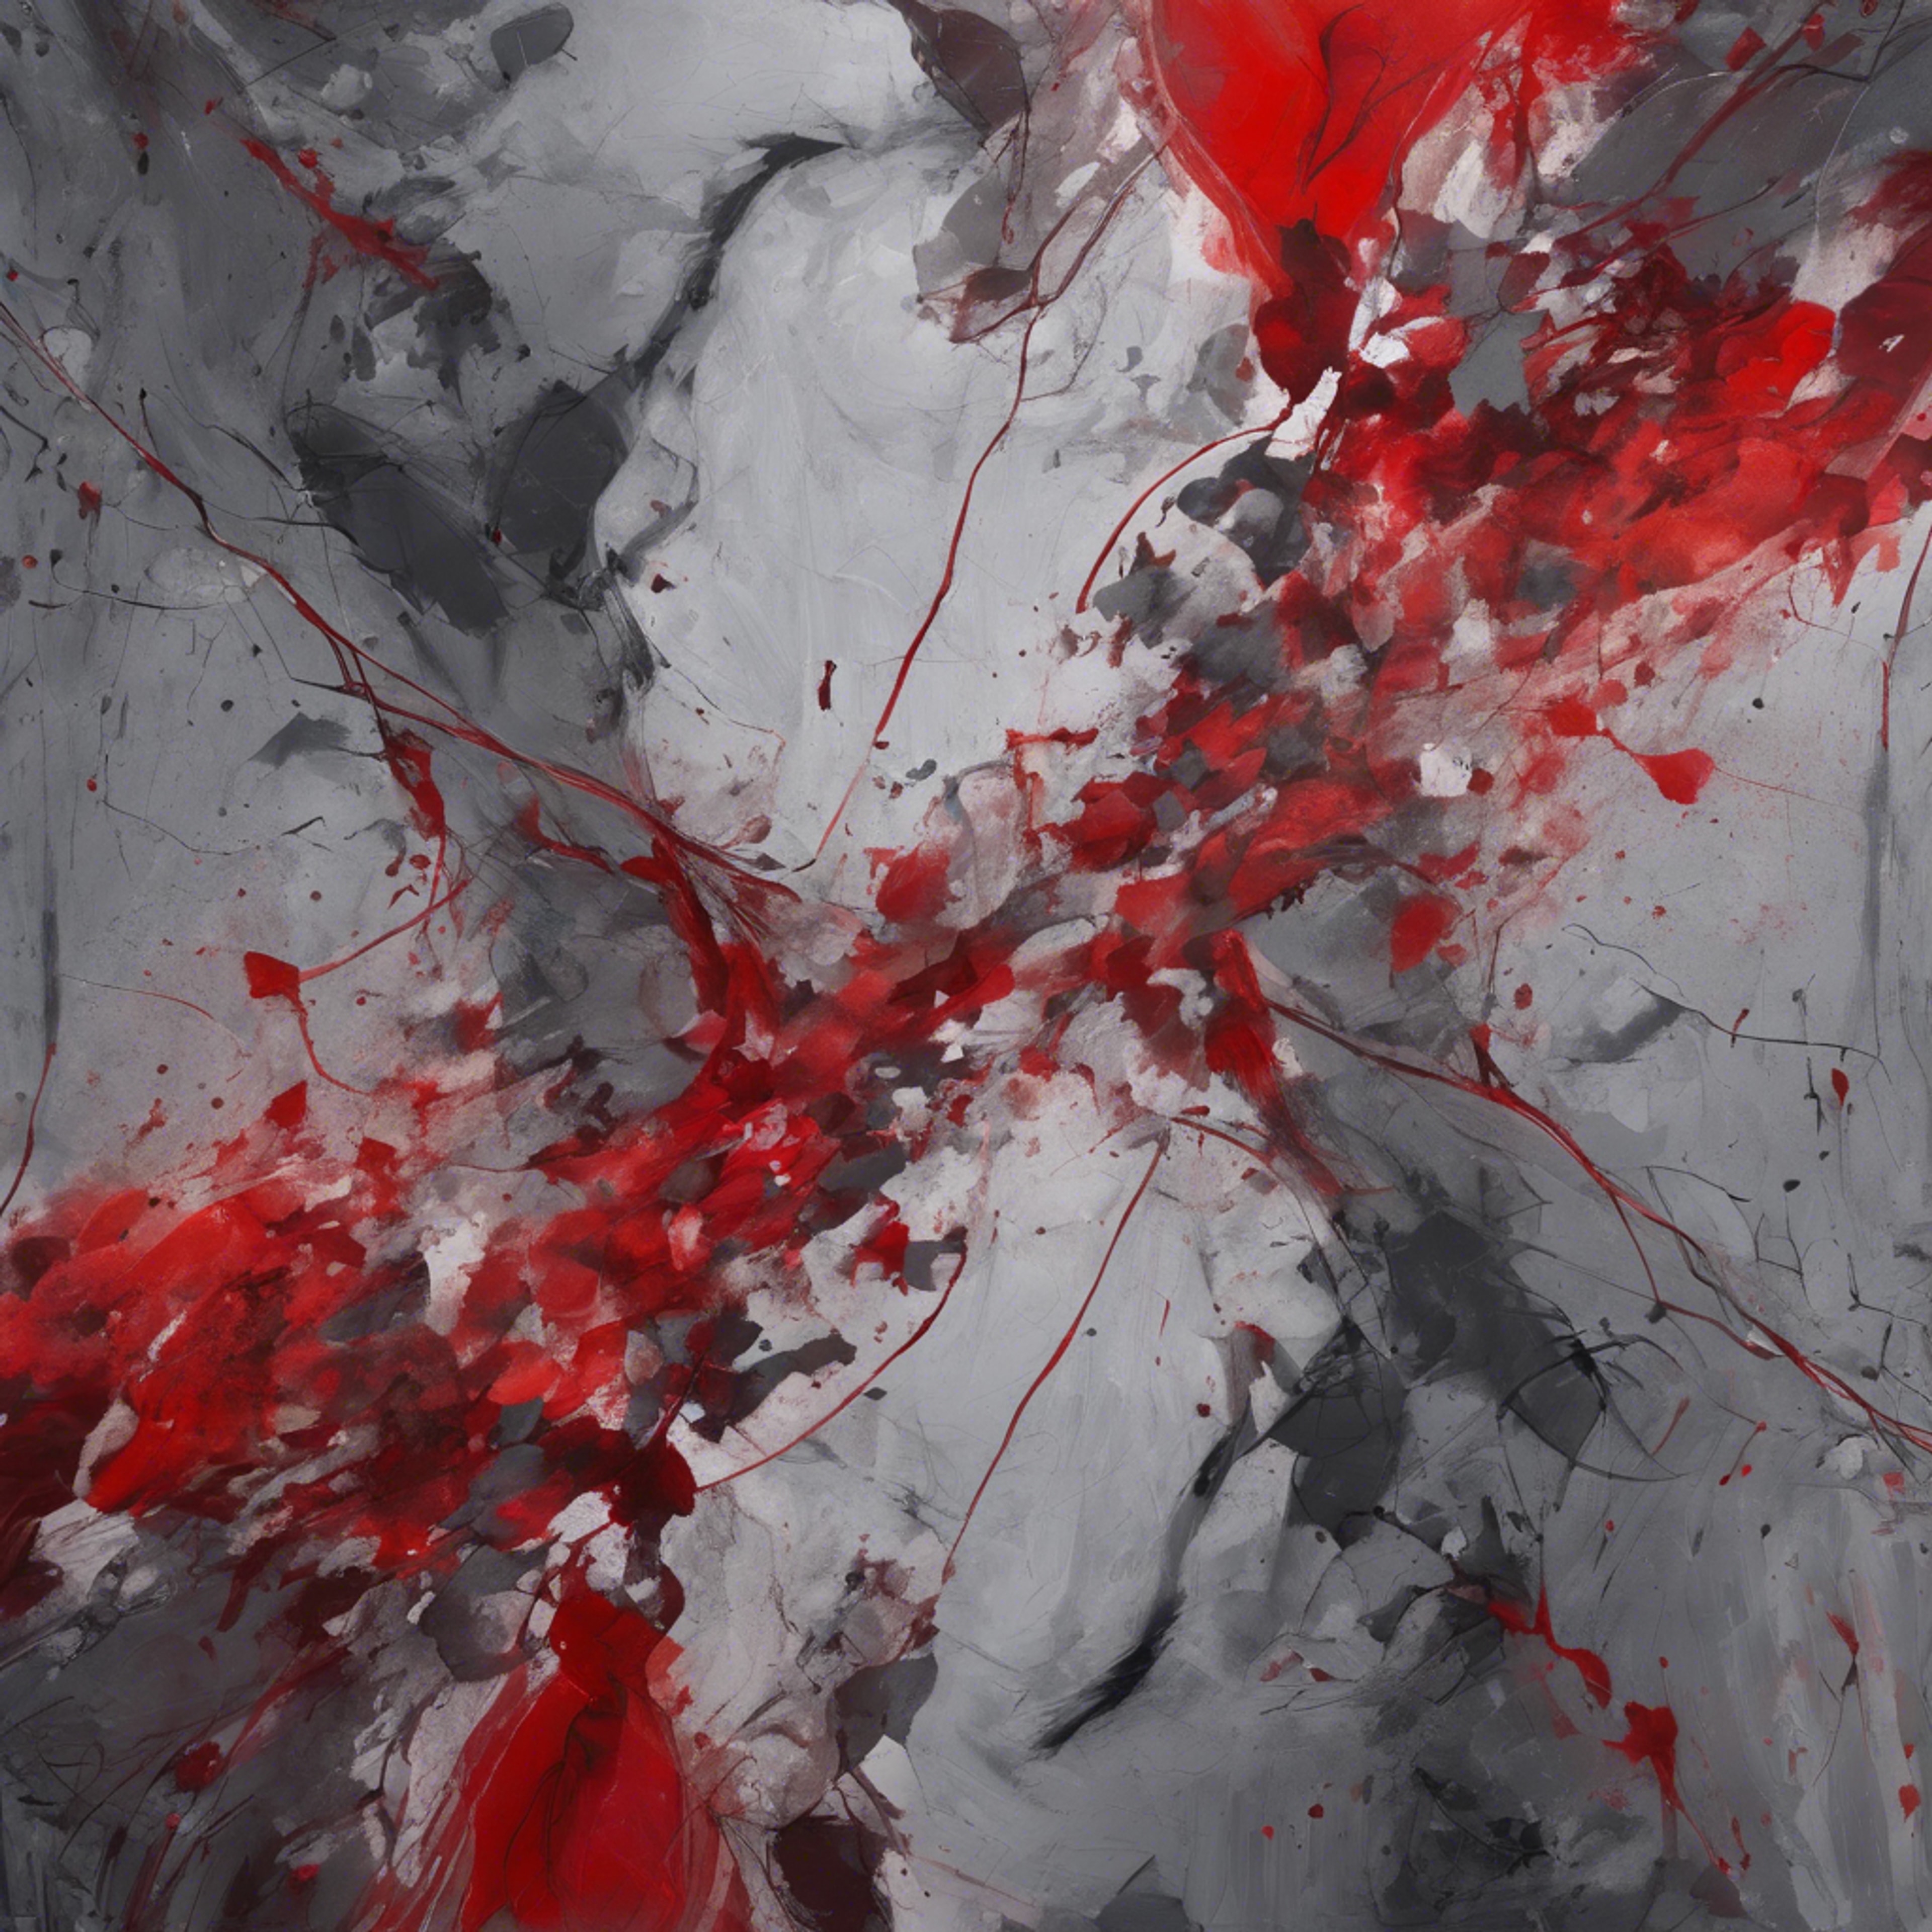 A red and gray abstract painting demonstrating the battle between passion and reason. Tapeta na zeď[fb490a5db02d428289d0]